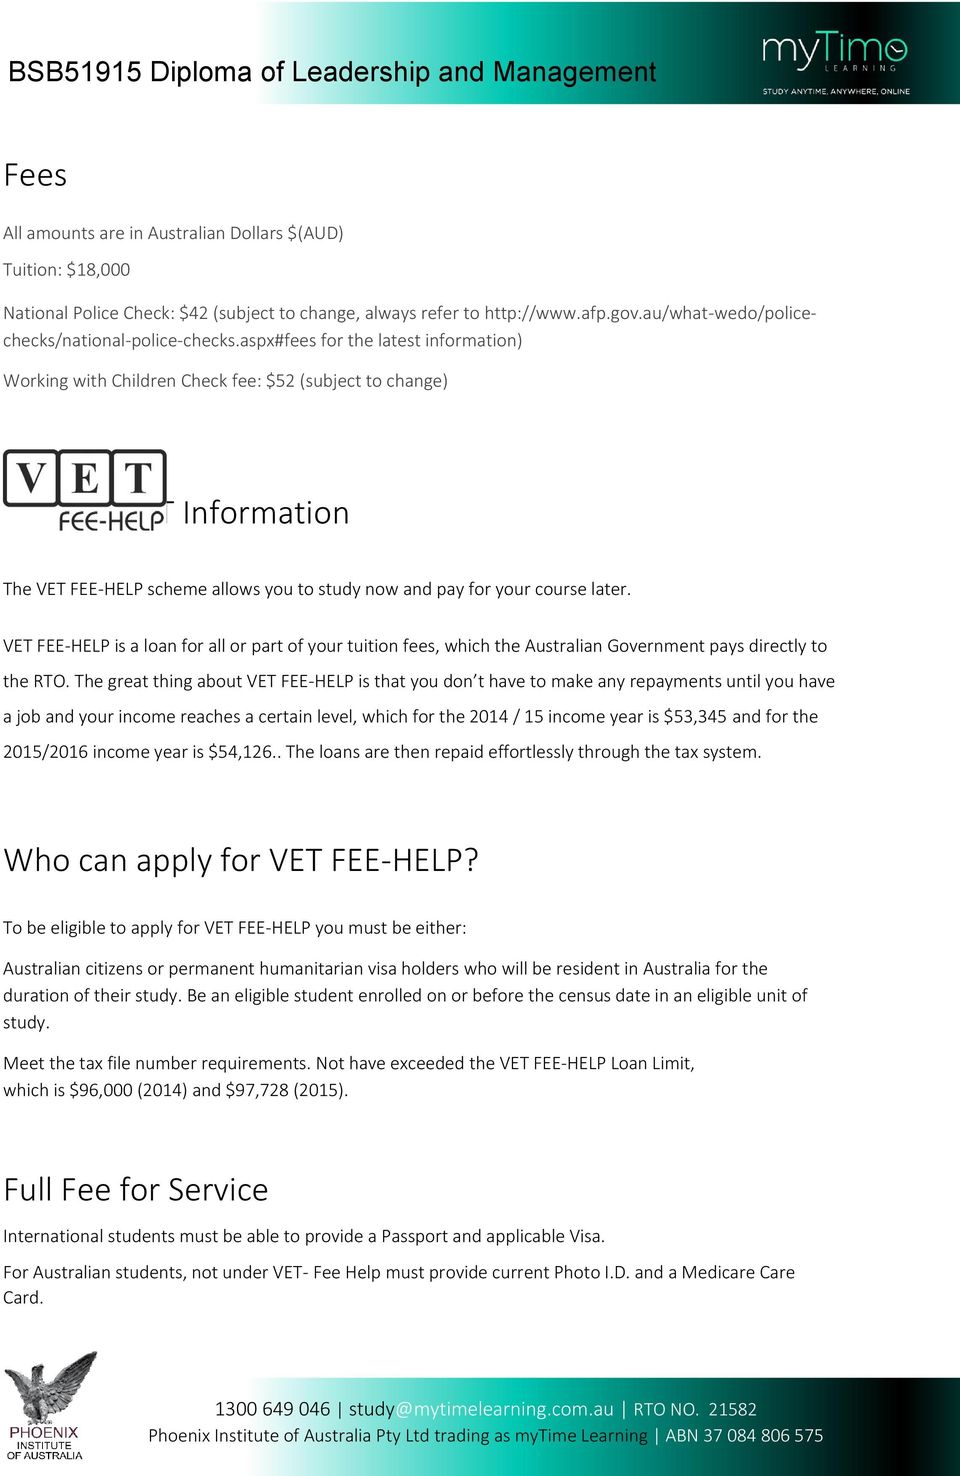 aspx#fees for the latest information) Working with Children Check fee: $52 (subject to change) About VE T Information The VET FEE-HELP scheme allows you to study now and pay for your course later.